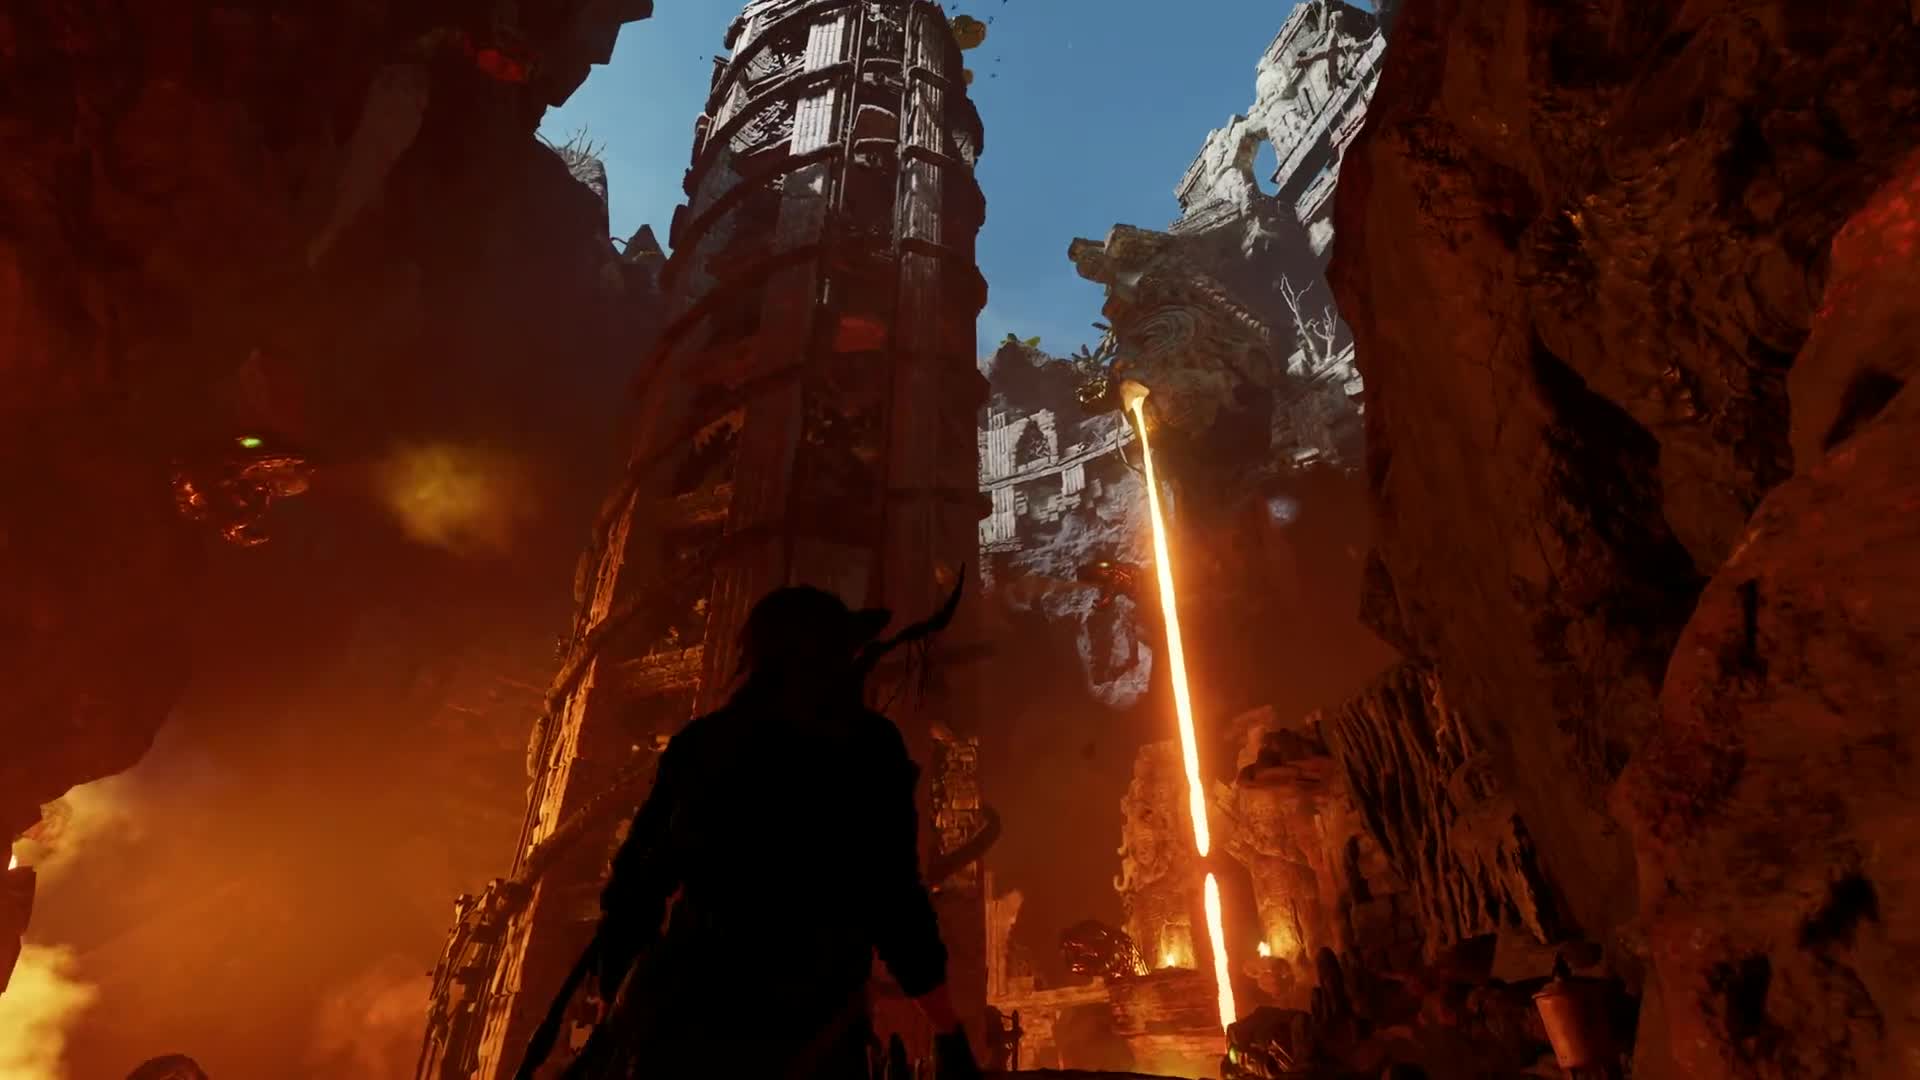 Shadow of the Tomb Raider - New Adventures trailer